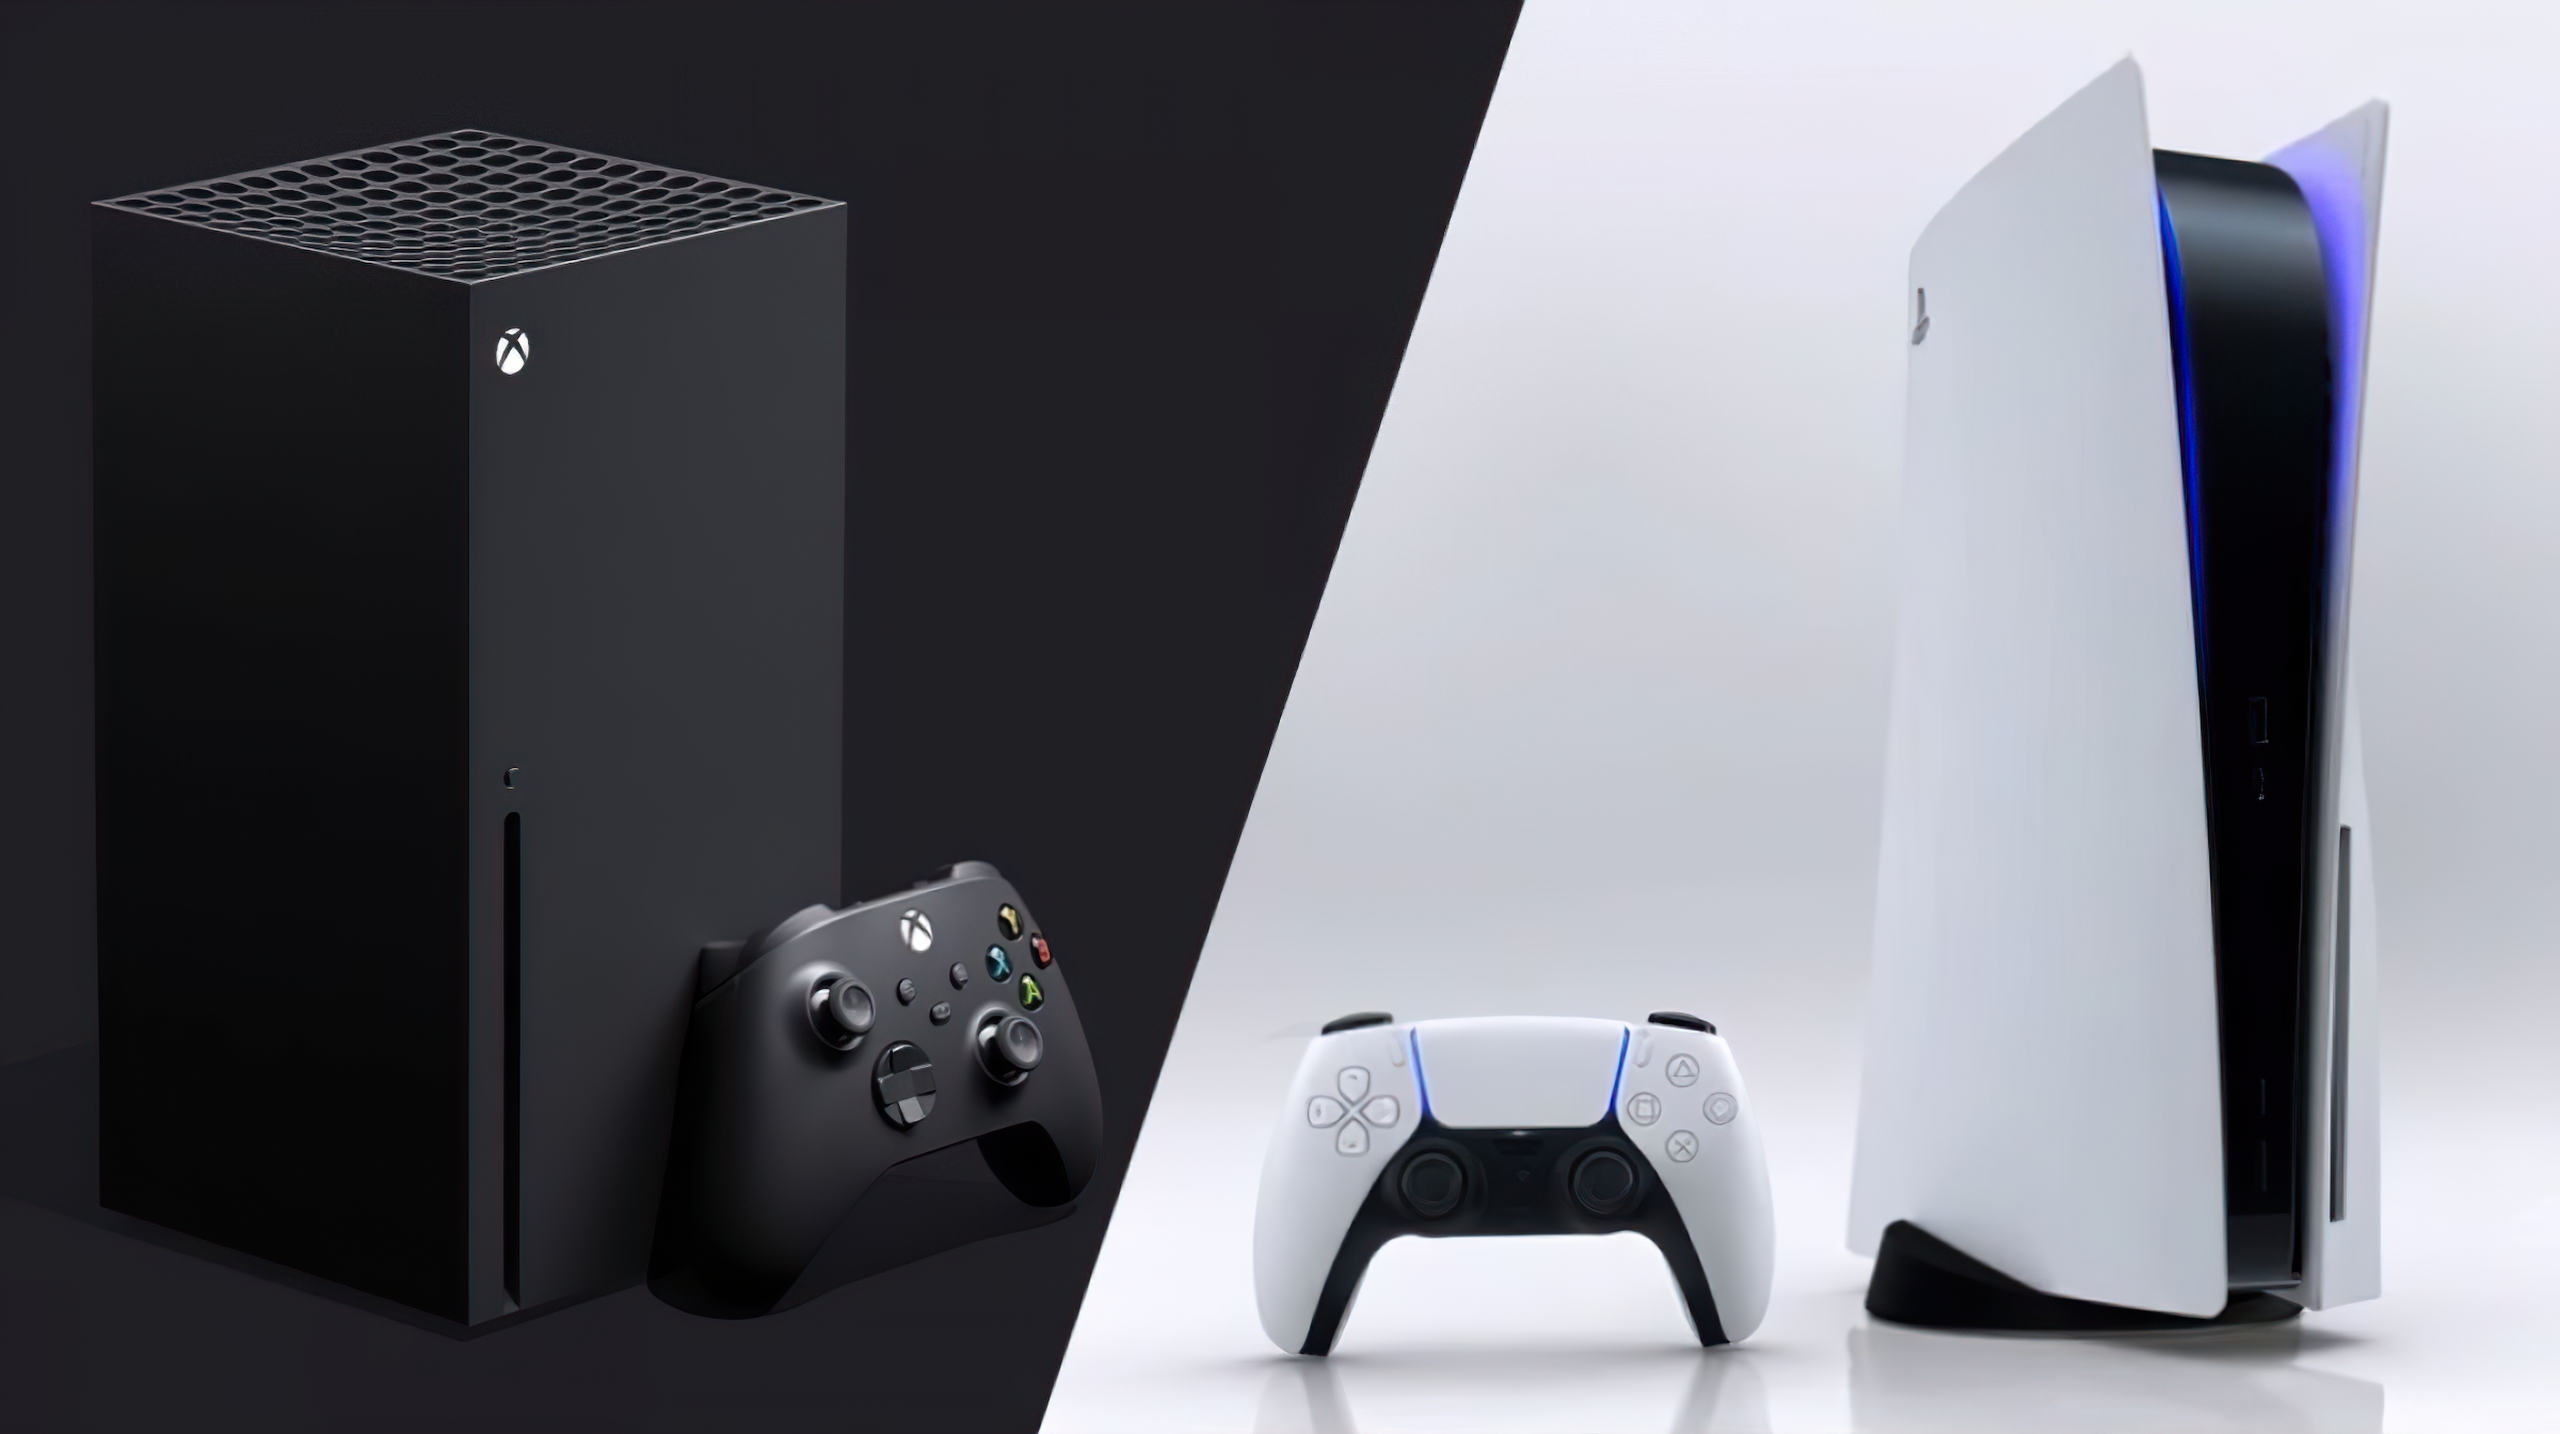 Ps5 ютубе. Ps5 Xbox. Ps5 Xbox Series x. Плейстейшен ps5. Sony PLAYSTATION ps5 Console.